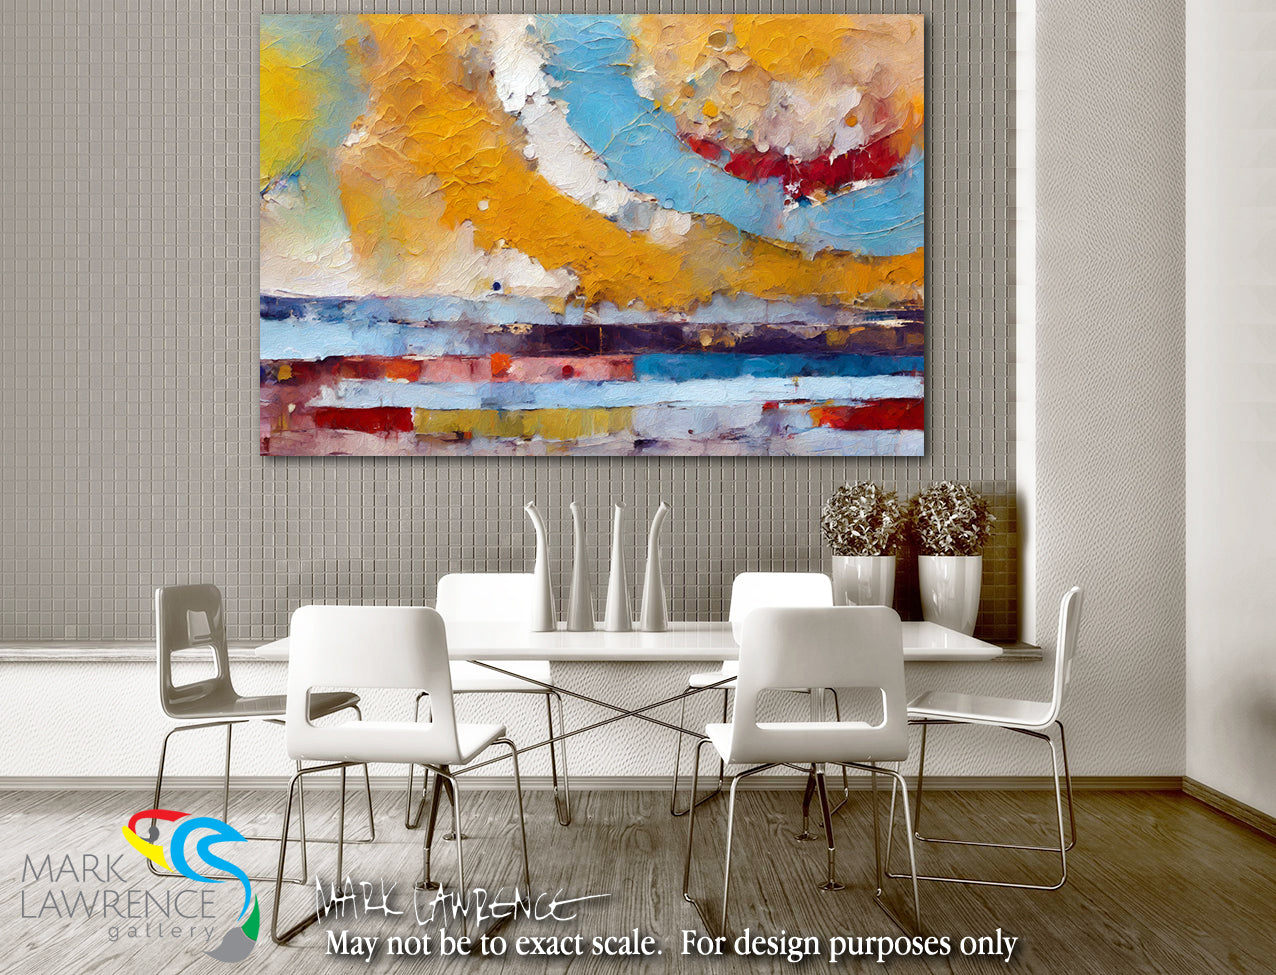 Interior Design Inspiration- John 6:37. Rescued by Love. Limited Edition Christian Modern Art. Hand embellished & textured giclee paintings with bold brush strokes. Signed & numbered canvas wall art prints. Beloved, no matter where you've been or what you've done, know this: Jesus promised that all who come to Him will never be turned away.